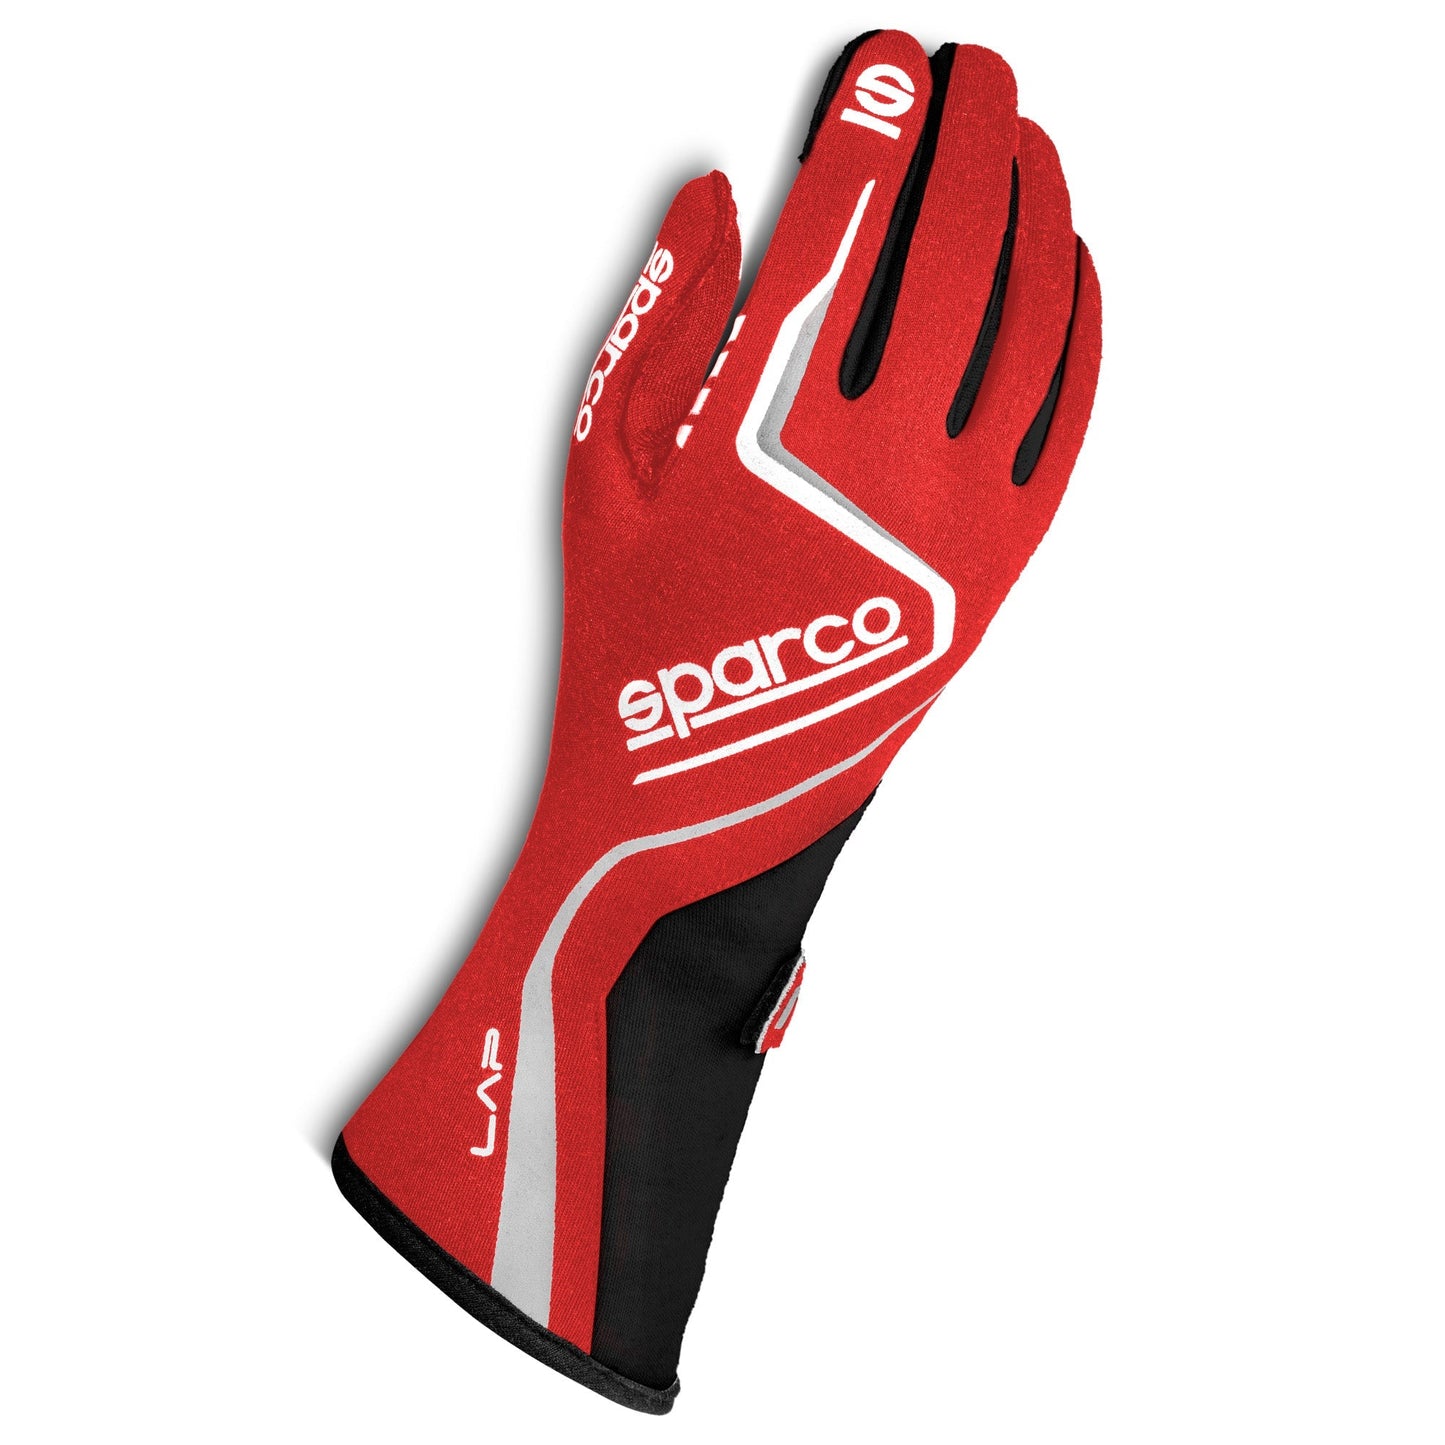 Sparco Lap Racing Gloves - 2021 Model